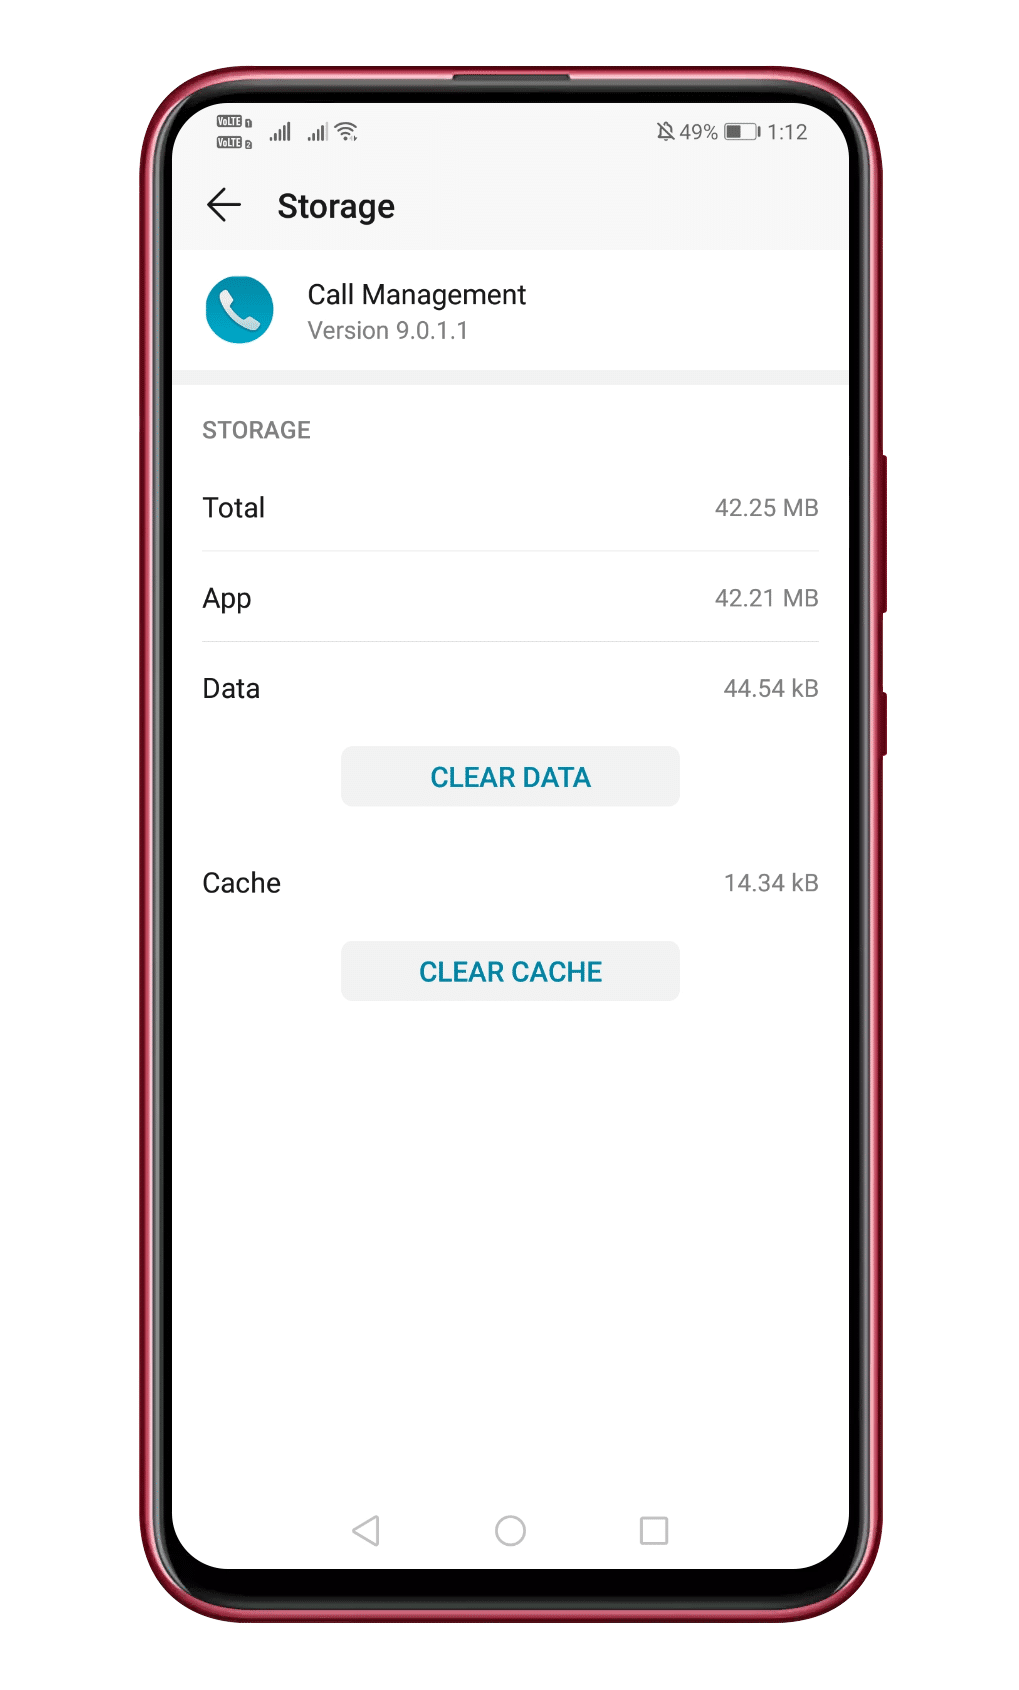 Tap on the 'Clear Cache' Button